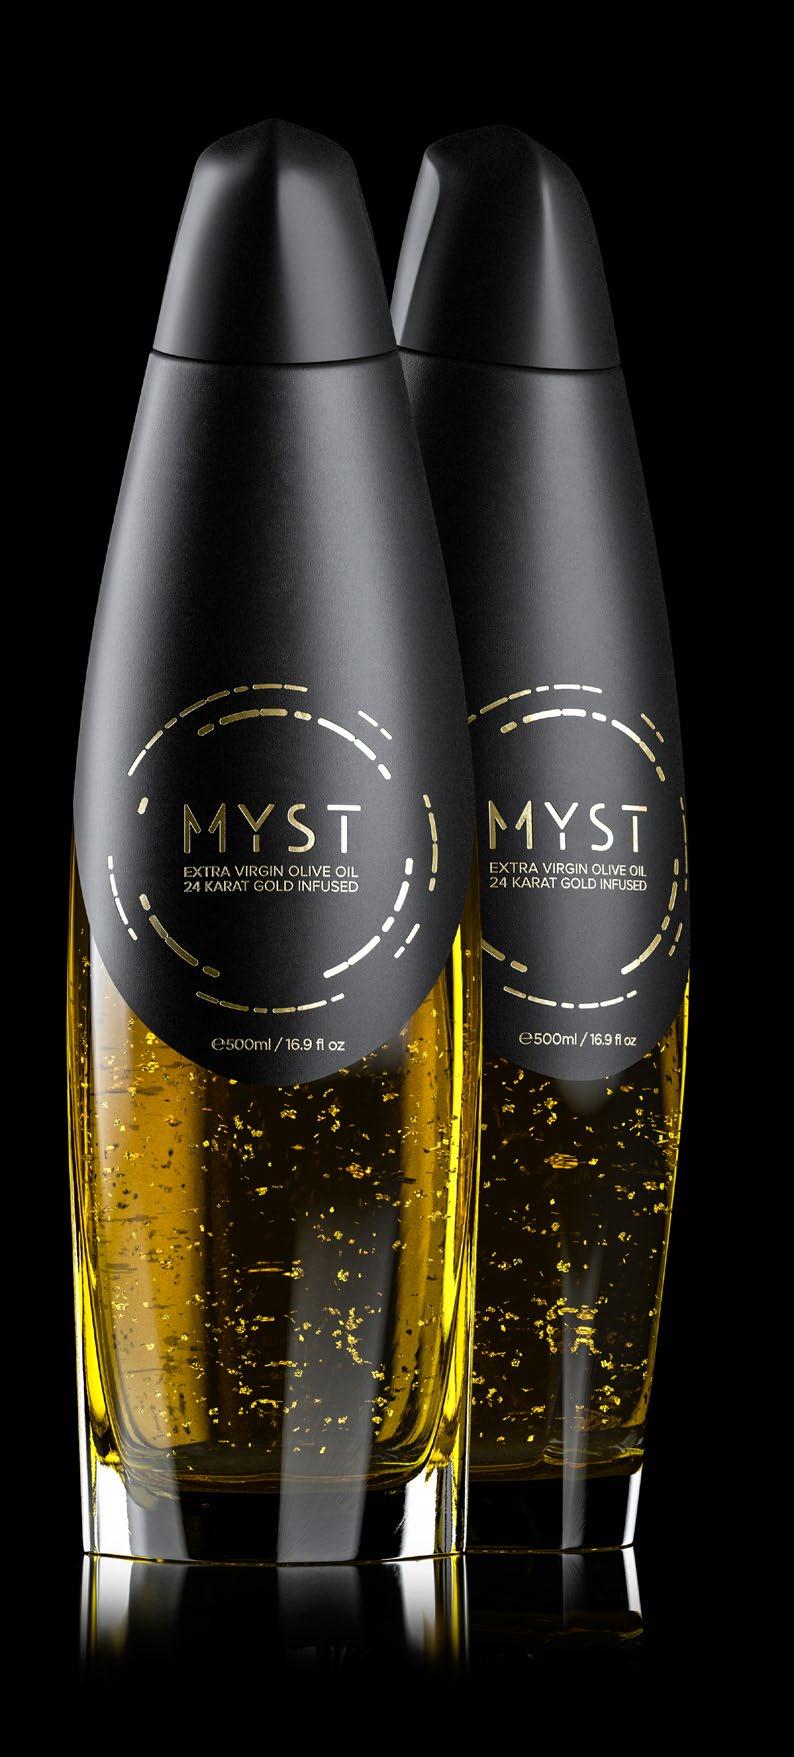 MYST GOLD Finest category of a gourmet extra virgin olive oil